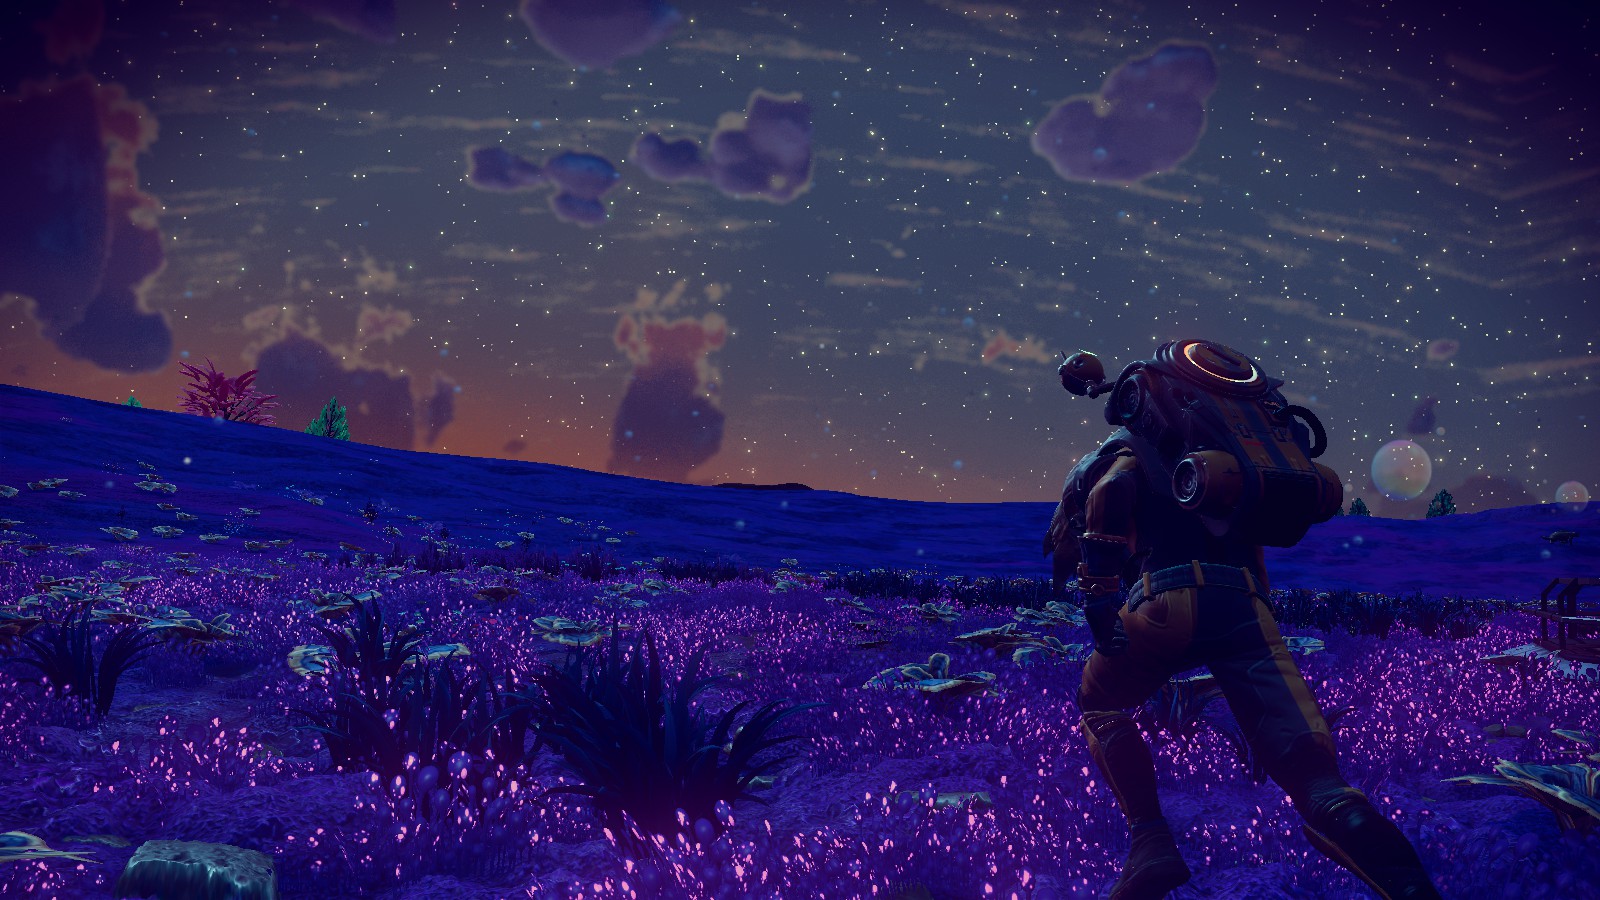 No Man's Sky, Expedition 1, a gorgeous blue landscape with bioluminescent purple flora under a cloud and star filled sky at sunset.